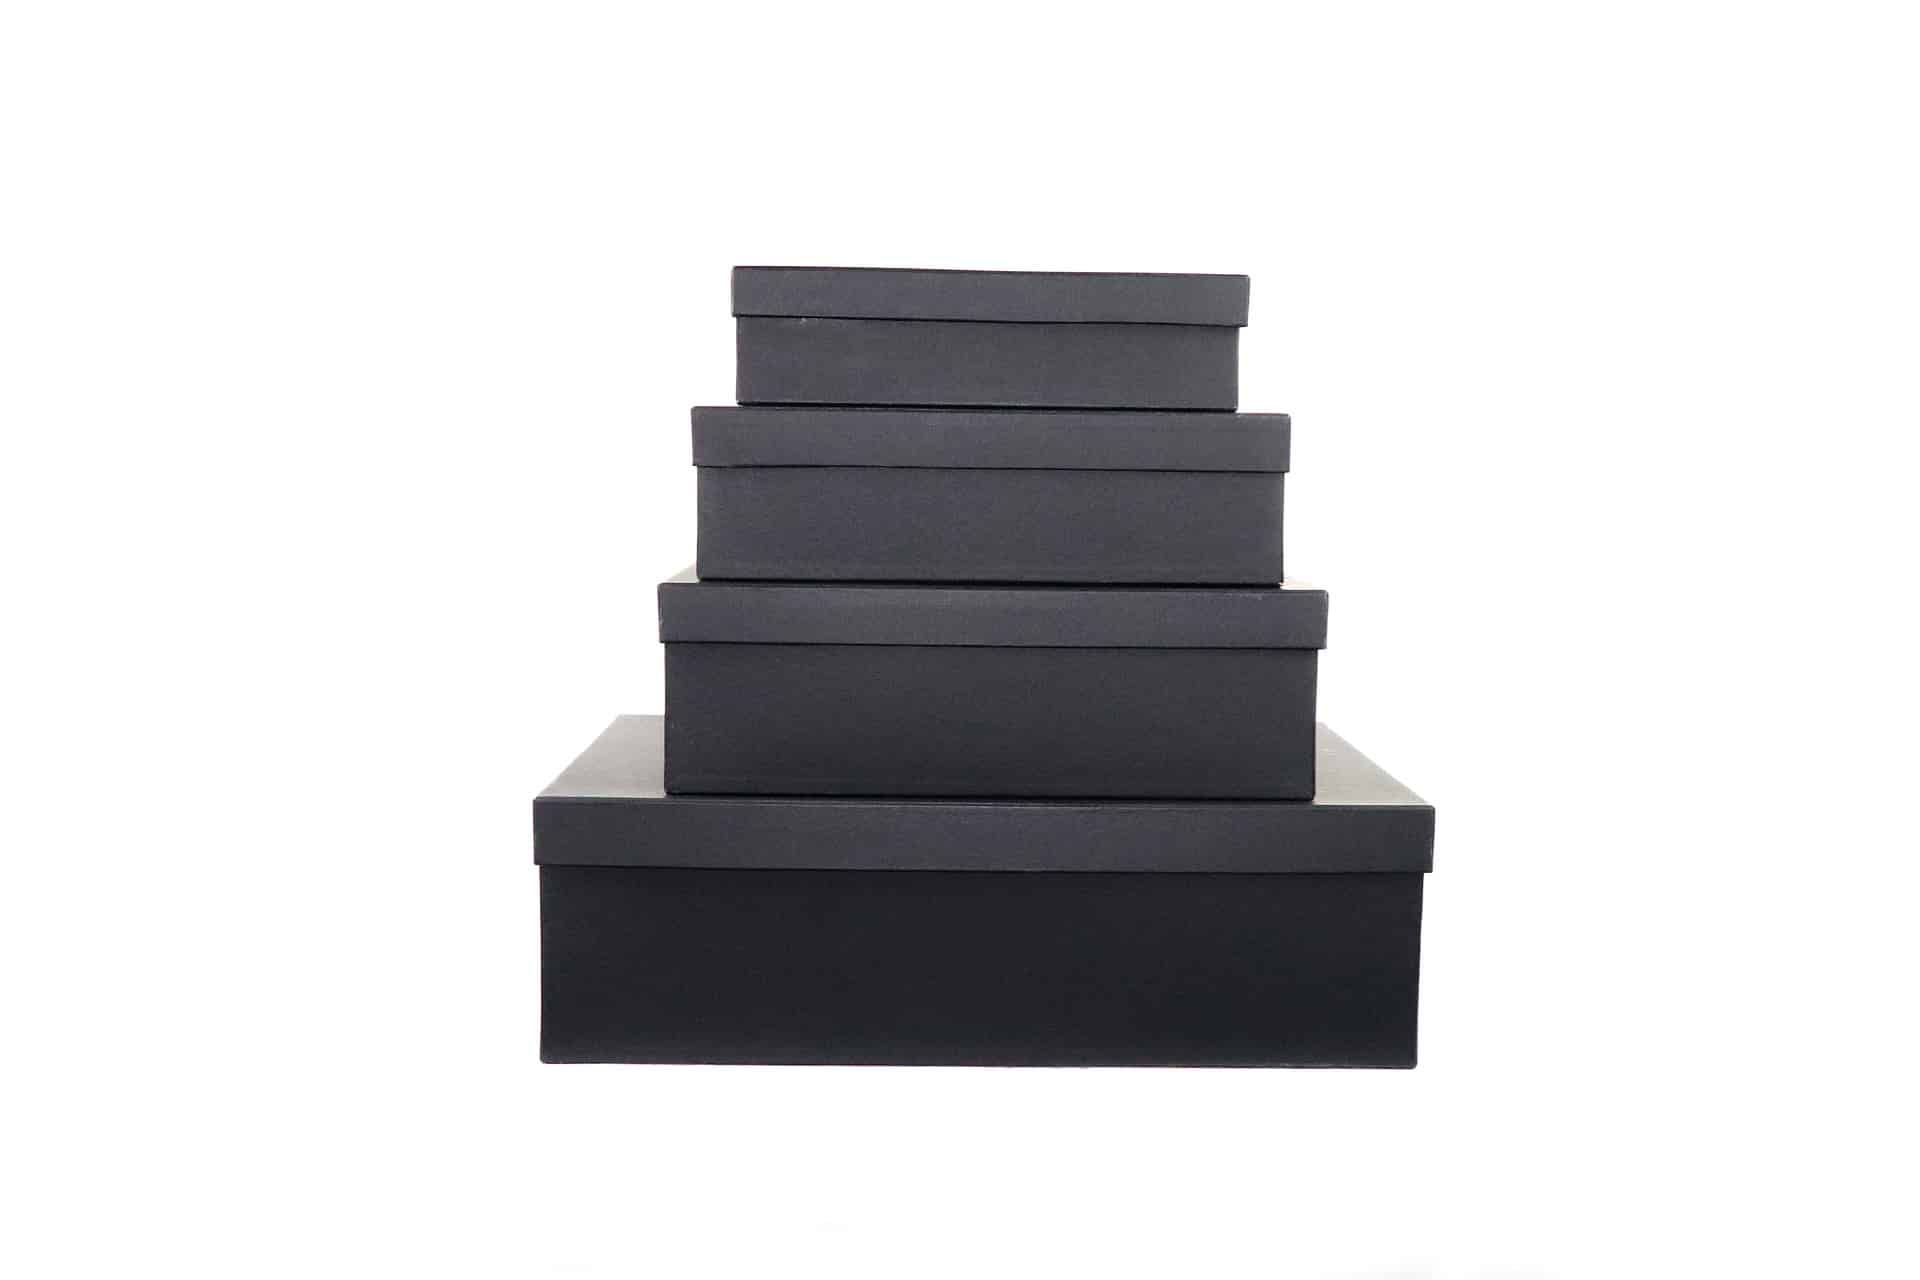 Four black boxes piled on top of one another